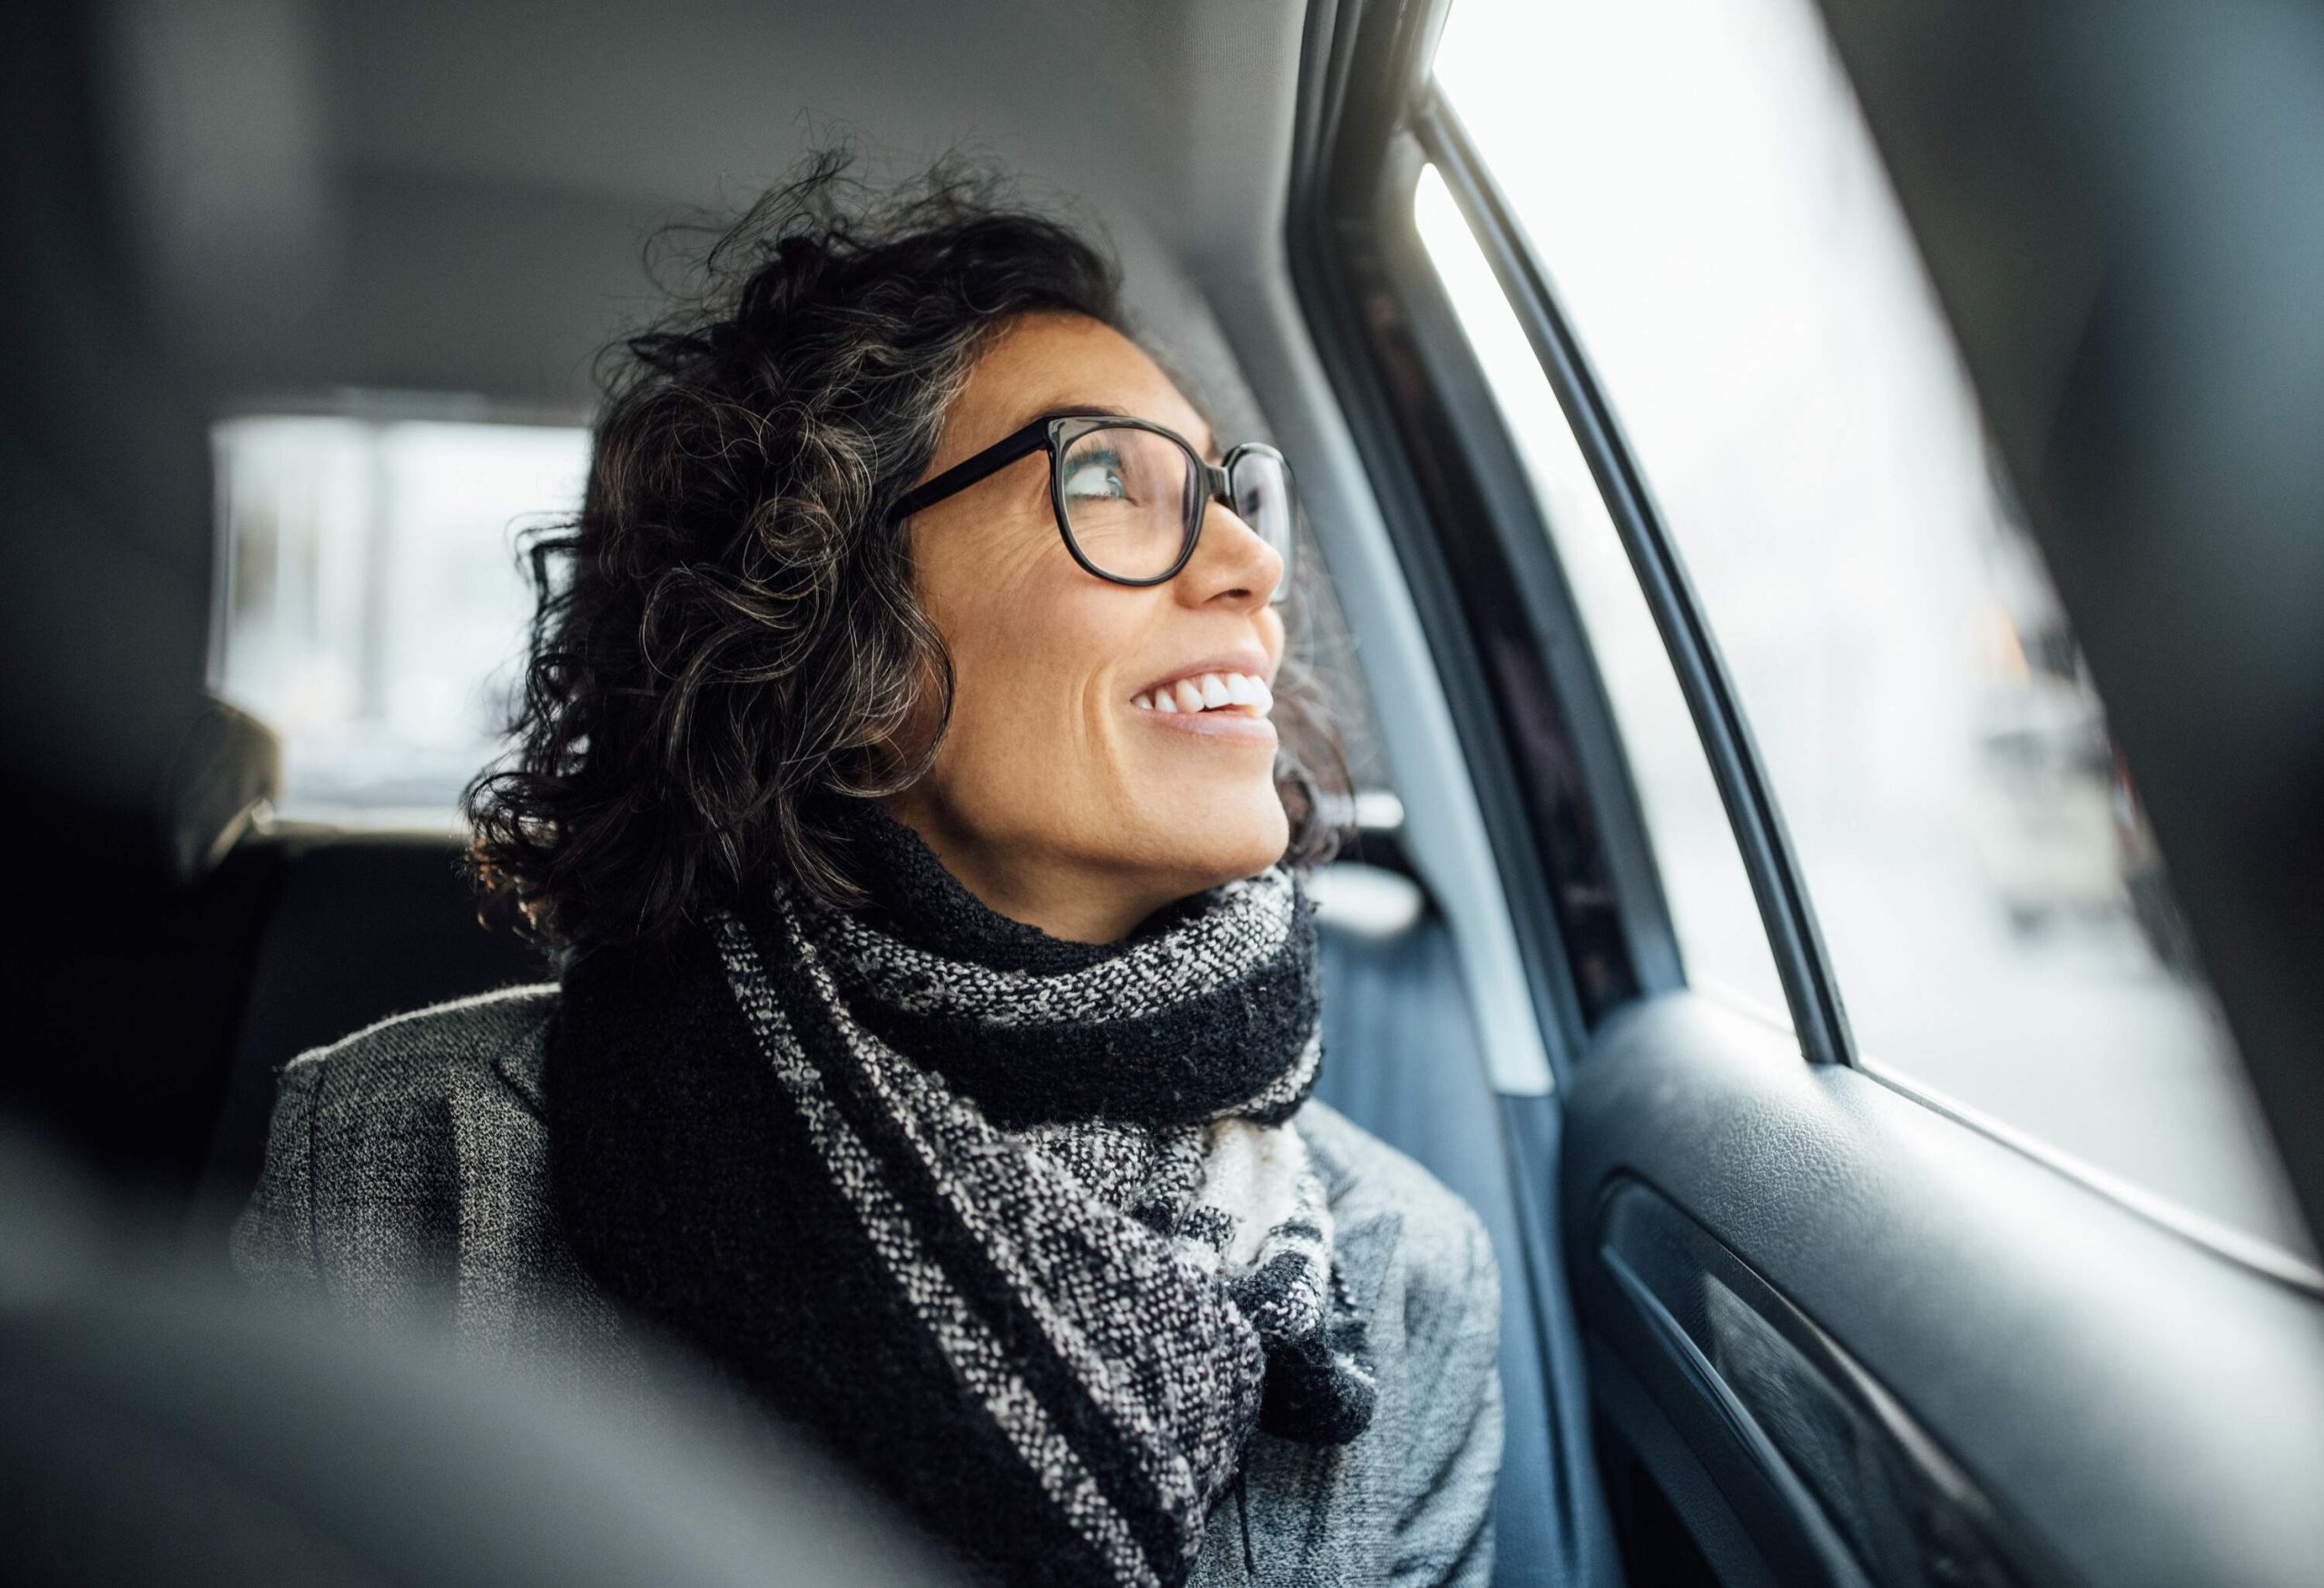 Mature woman sitting in backseat of a car looking out the window and smiling. Mid adult female traveling by a car.